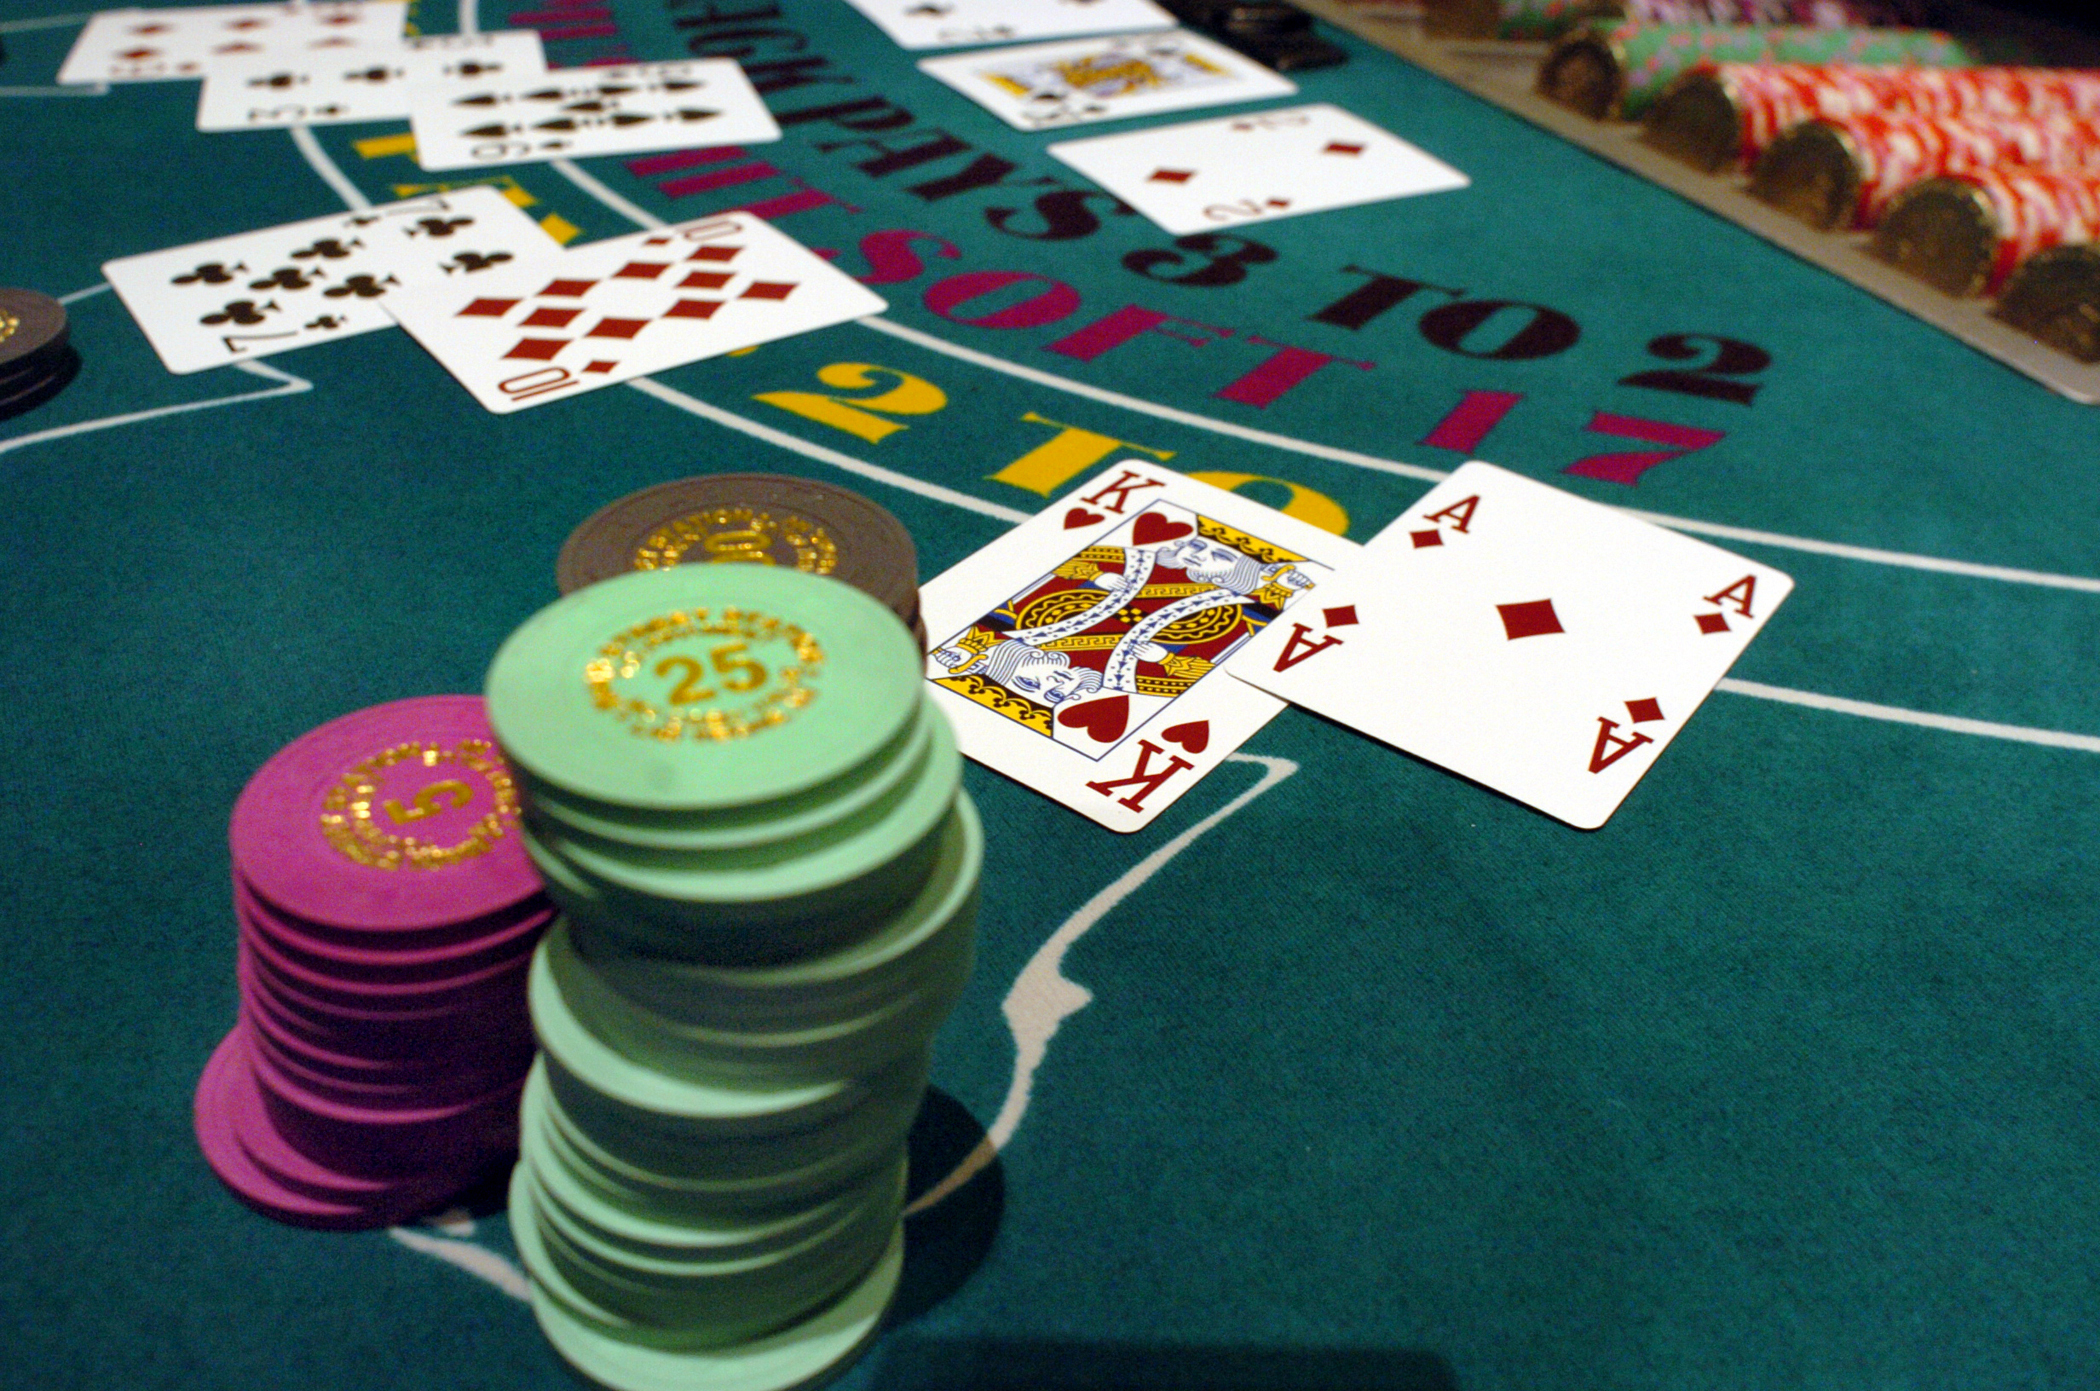 Card games in the casino of Las Vegas